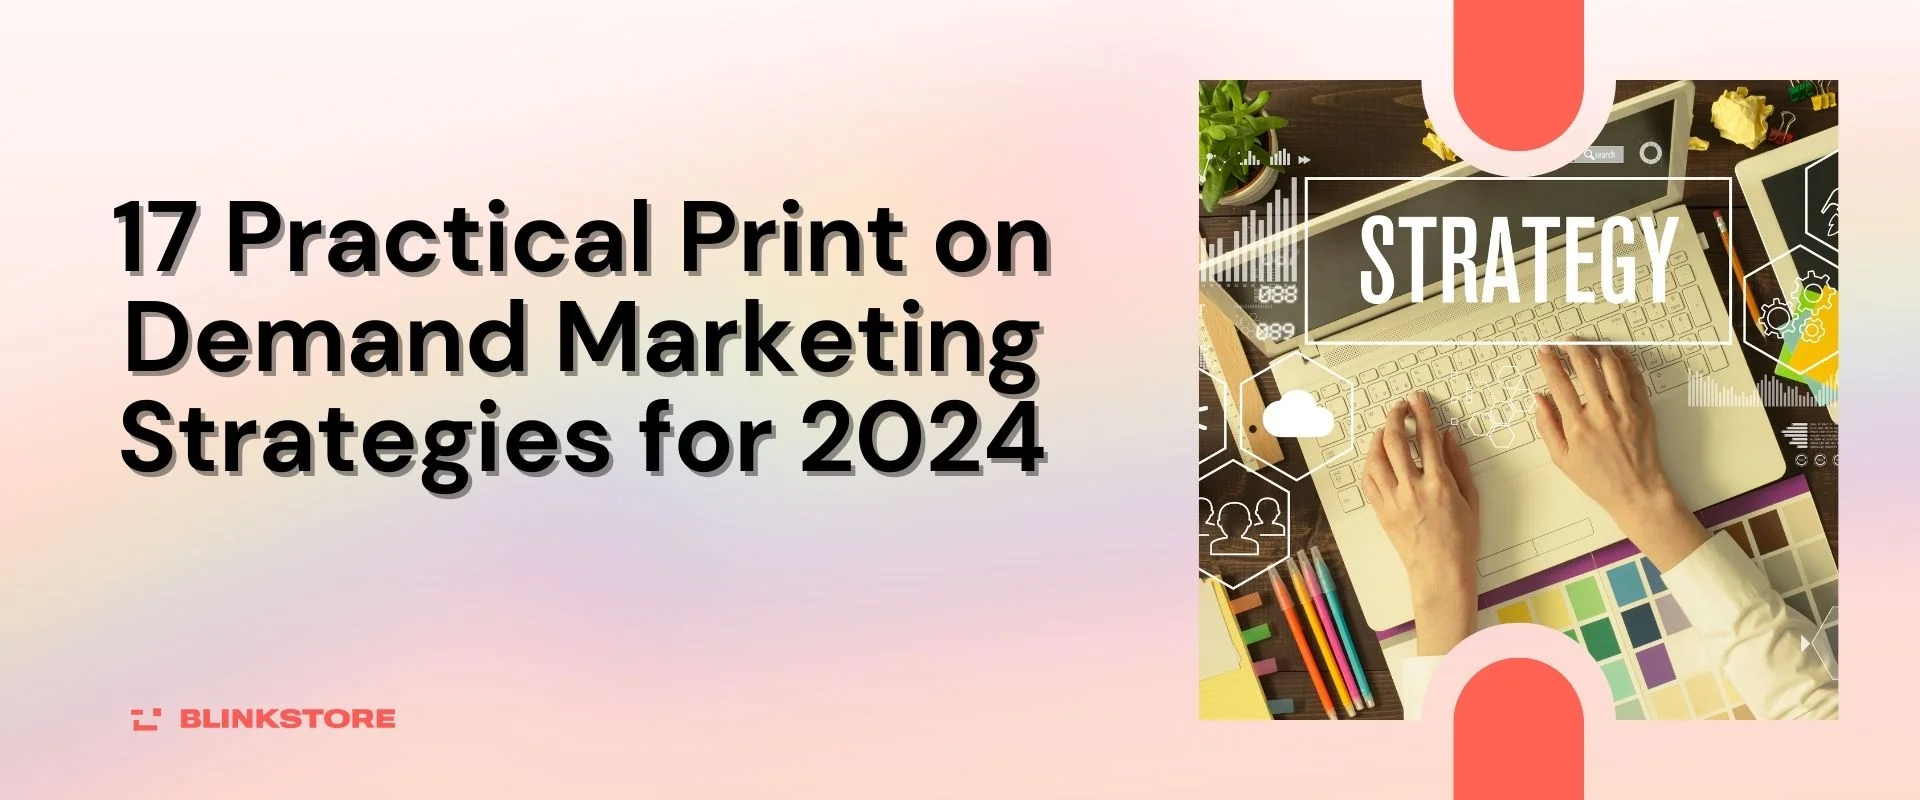 17 Practical Print on Demand Marketing Strategies for 2024